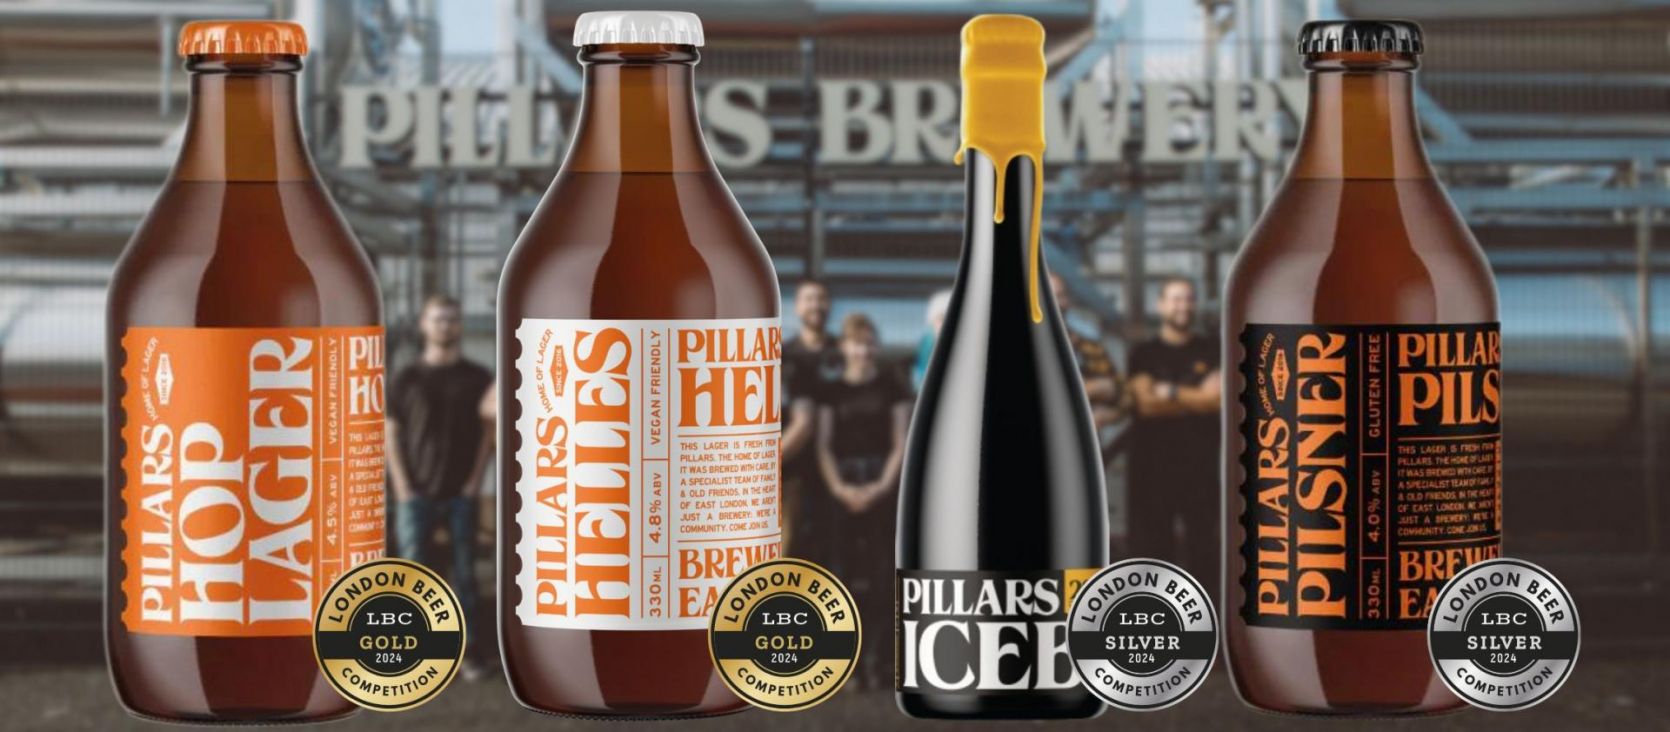 Photo for: Pillars Brewery: Gold & Silver Award Winners at the London Beer Competition